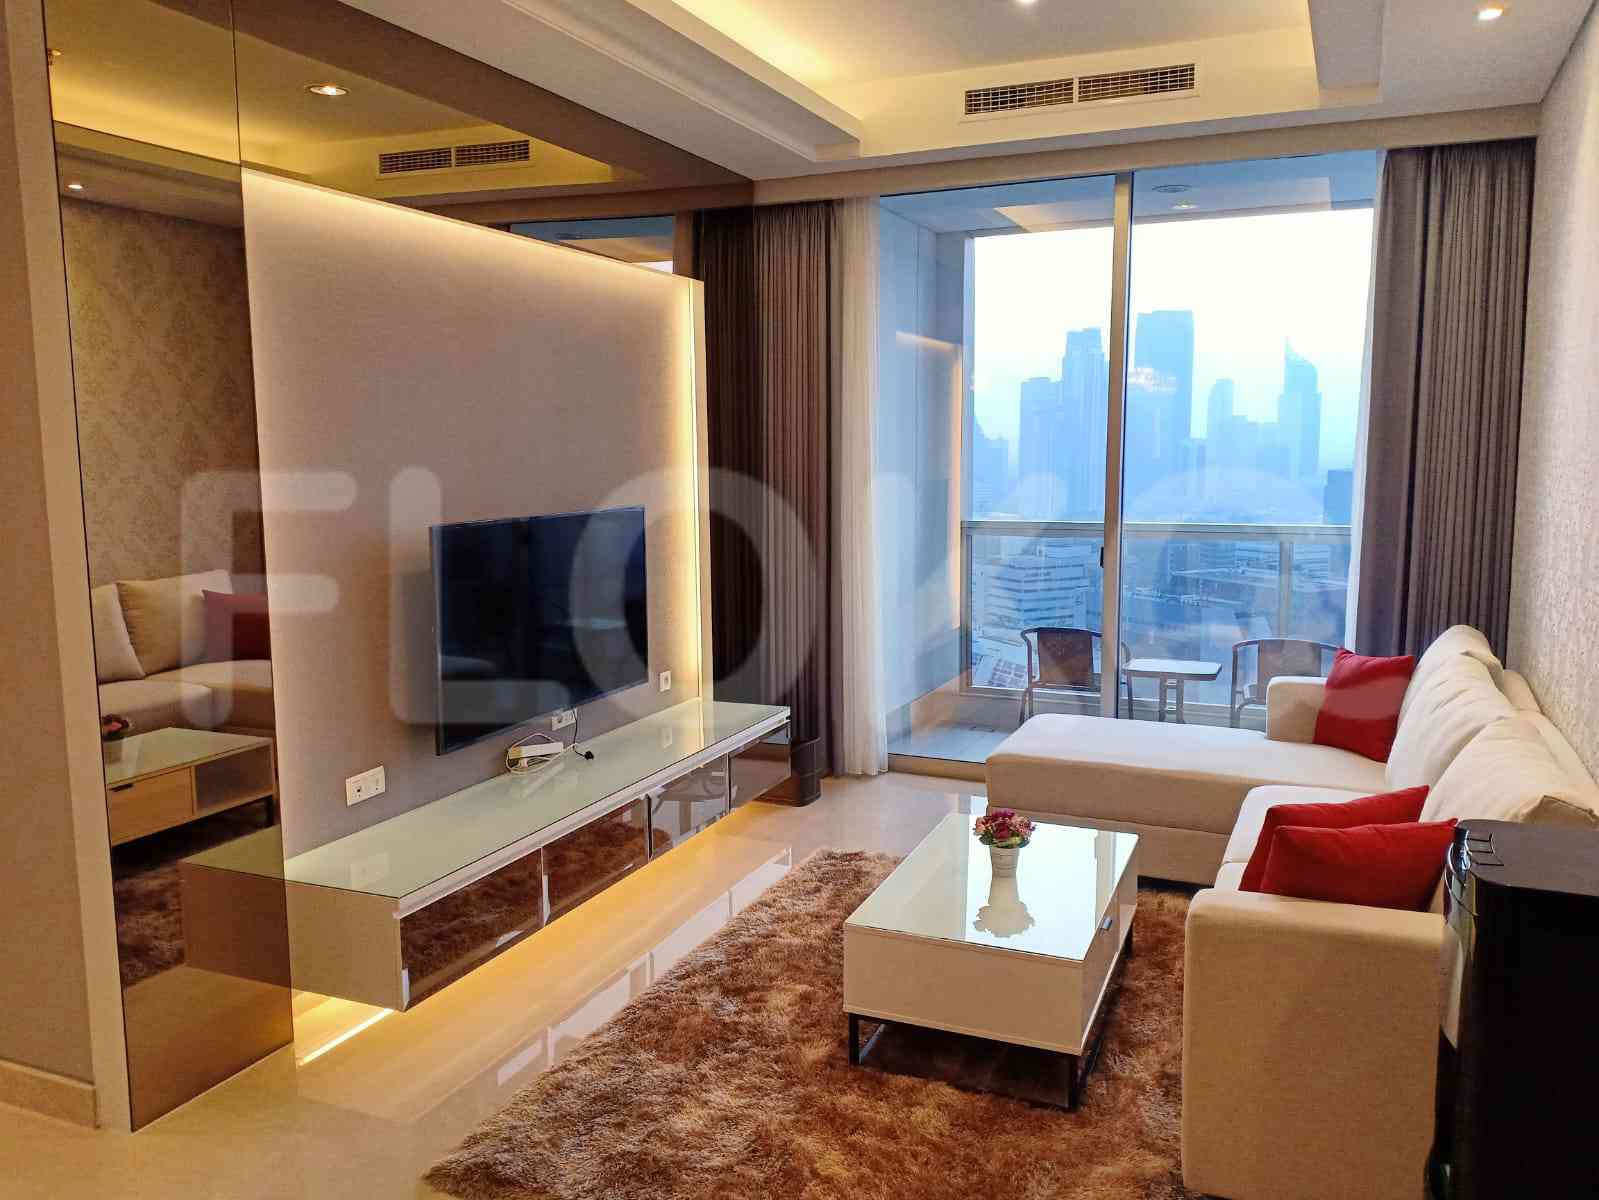 2 Bedroom on 27th Floor for Rent in The Elements Kuningan Apartment - fkua8e 1